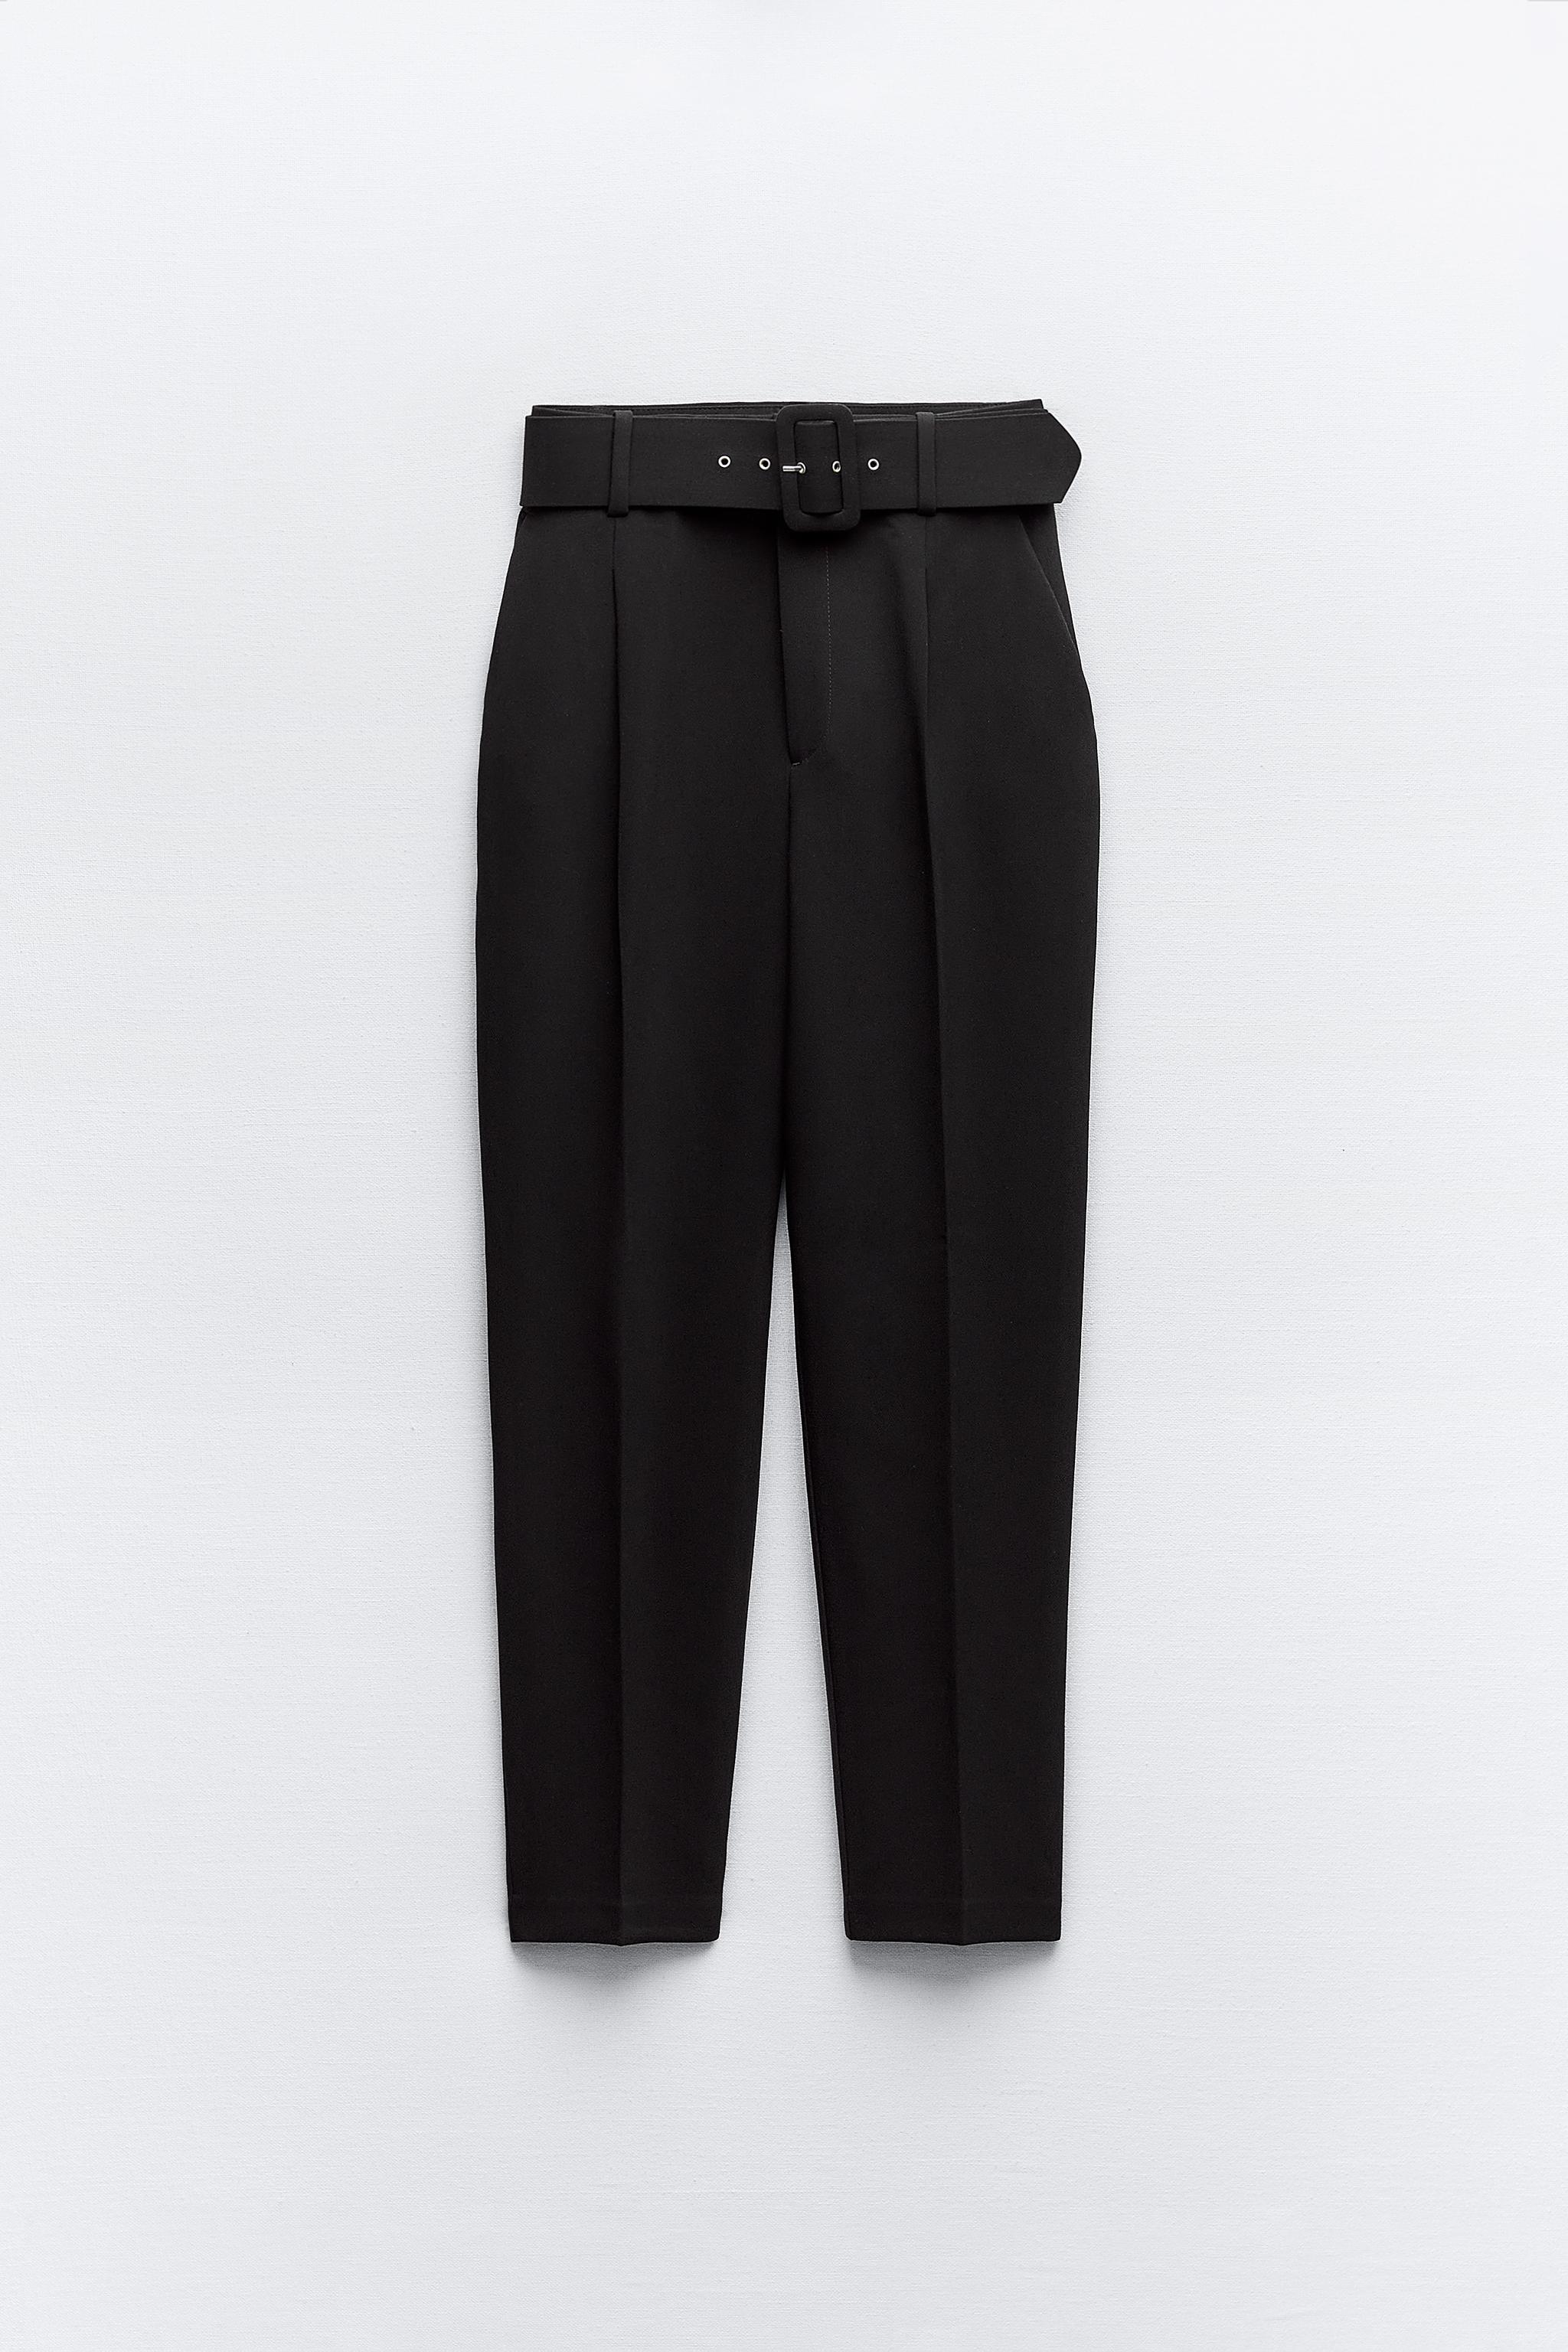 Shop ZARA Casual Style Medium Party Style Formal Style Pants by